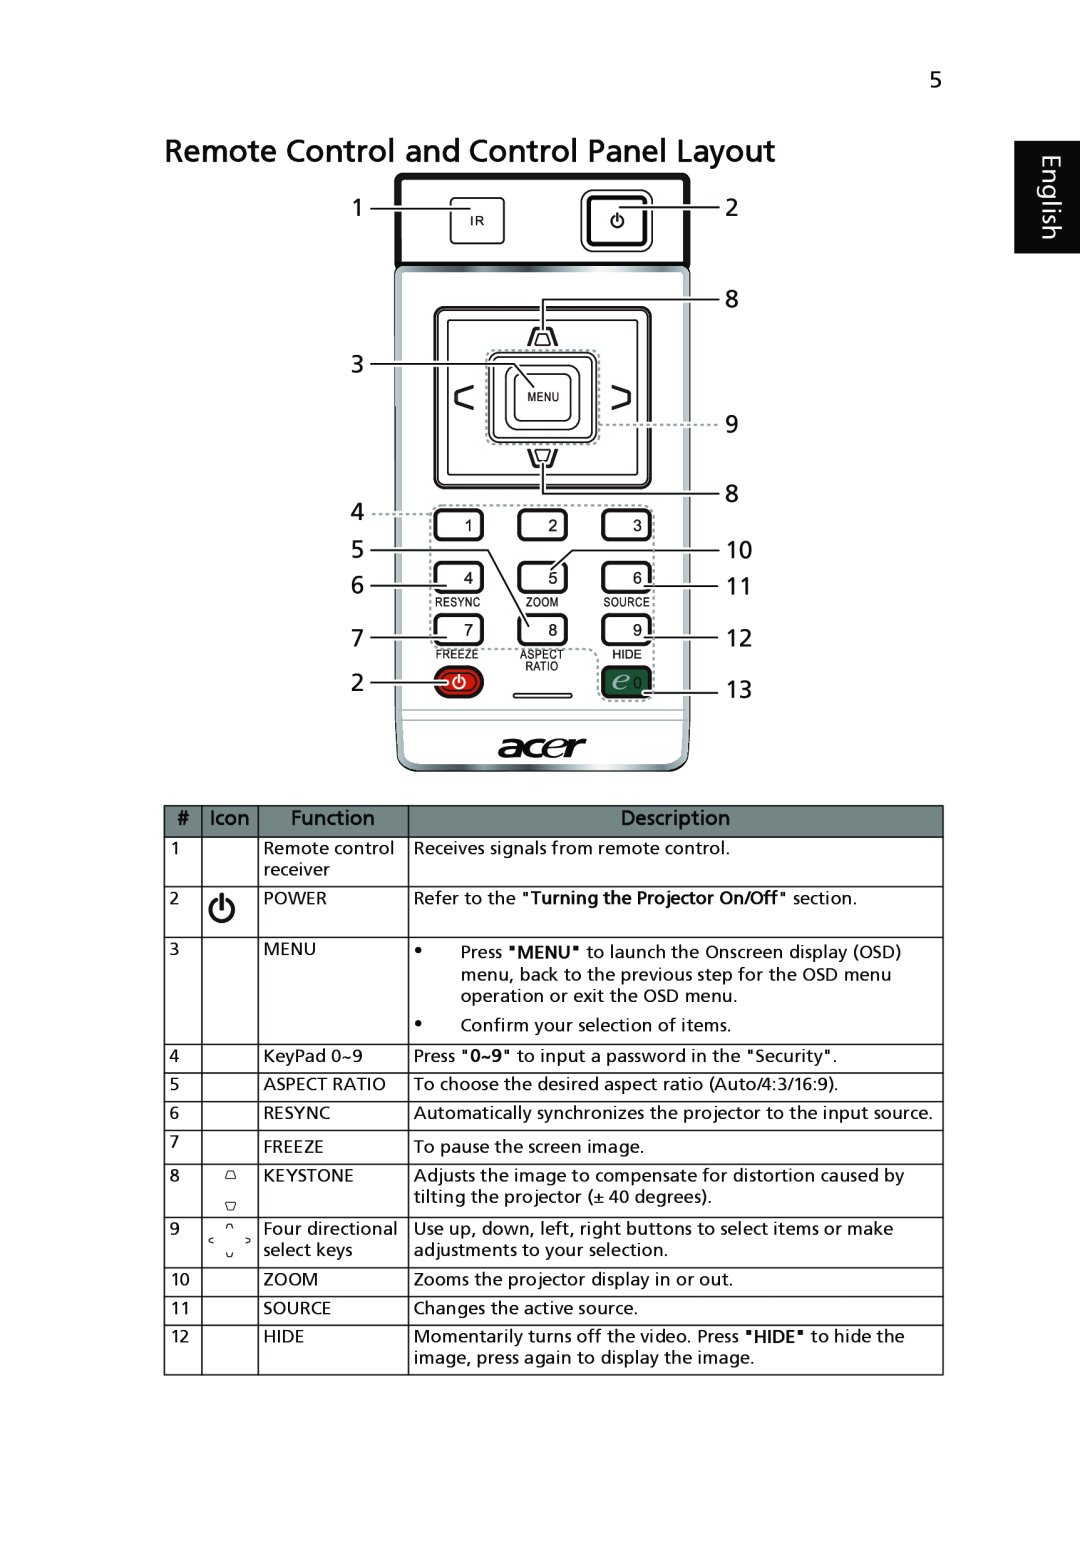 Acer X1161N, X1261, X1161A manual Remote Control and Control Panel Layout, # Icon, Function, English, Description 